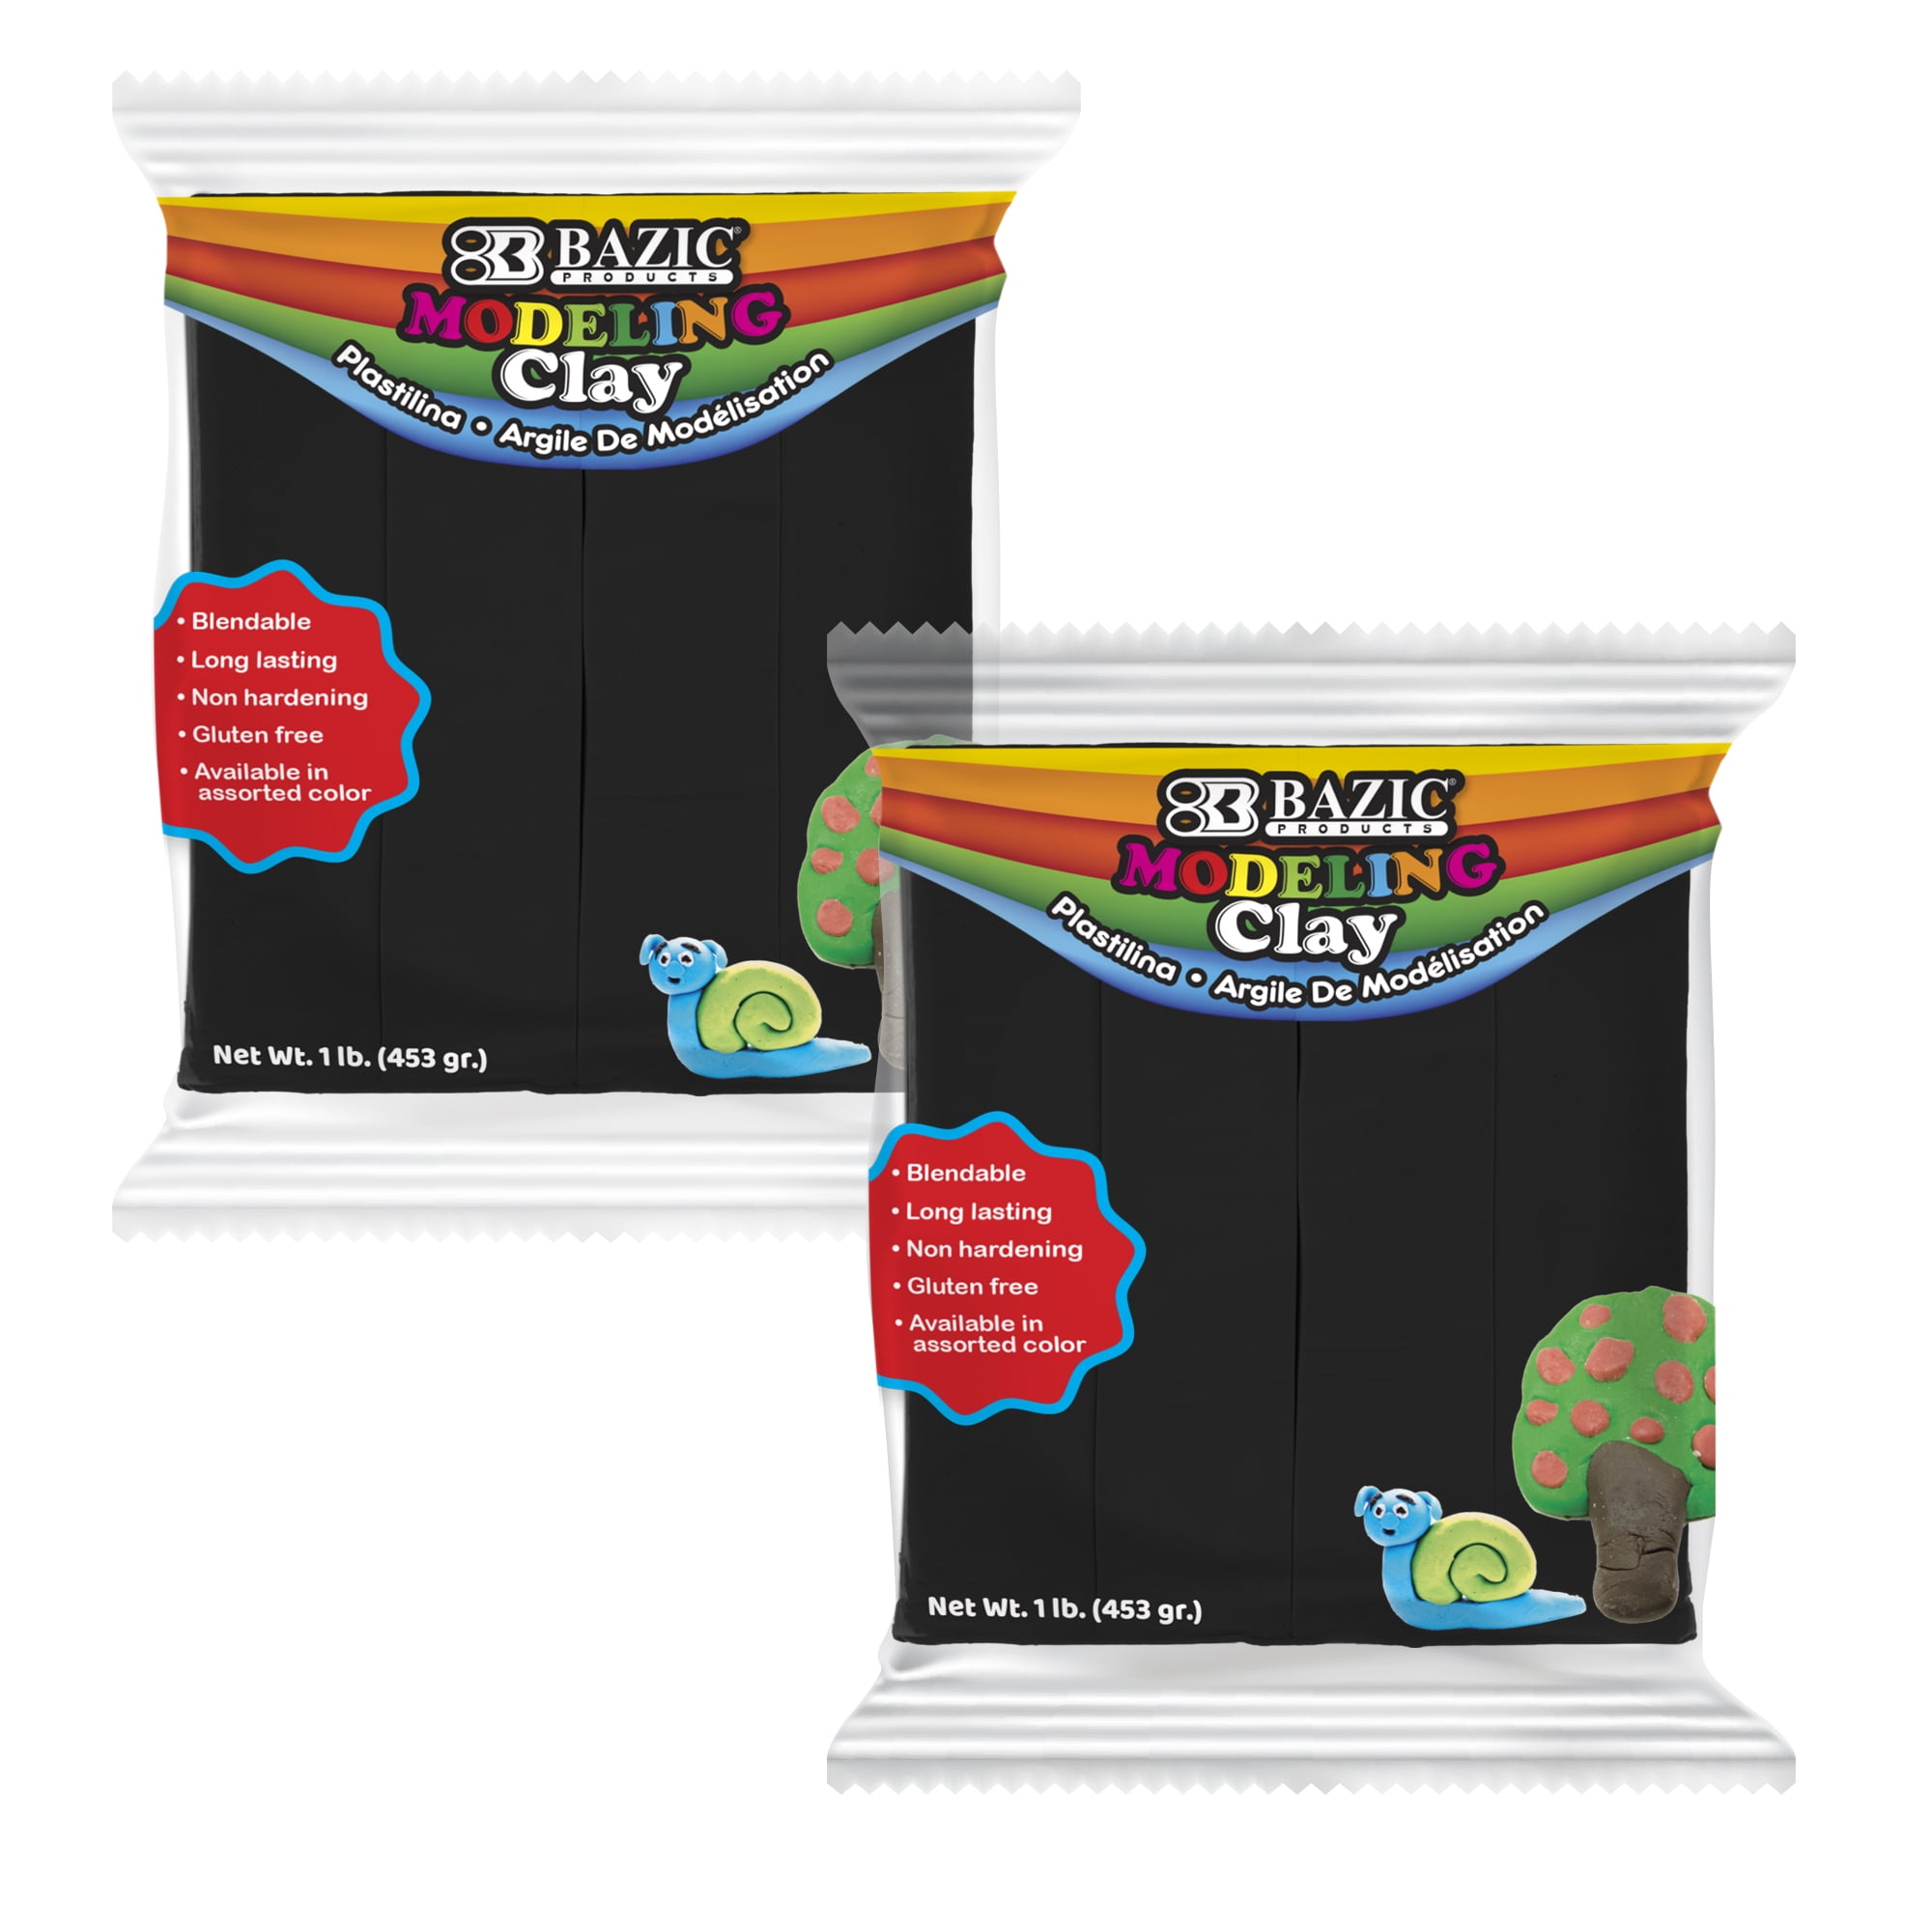 BAZIC 9.17 oz (260g) 9 Color Modeling Clay Sticks Bazic Products